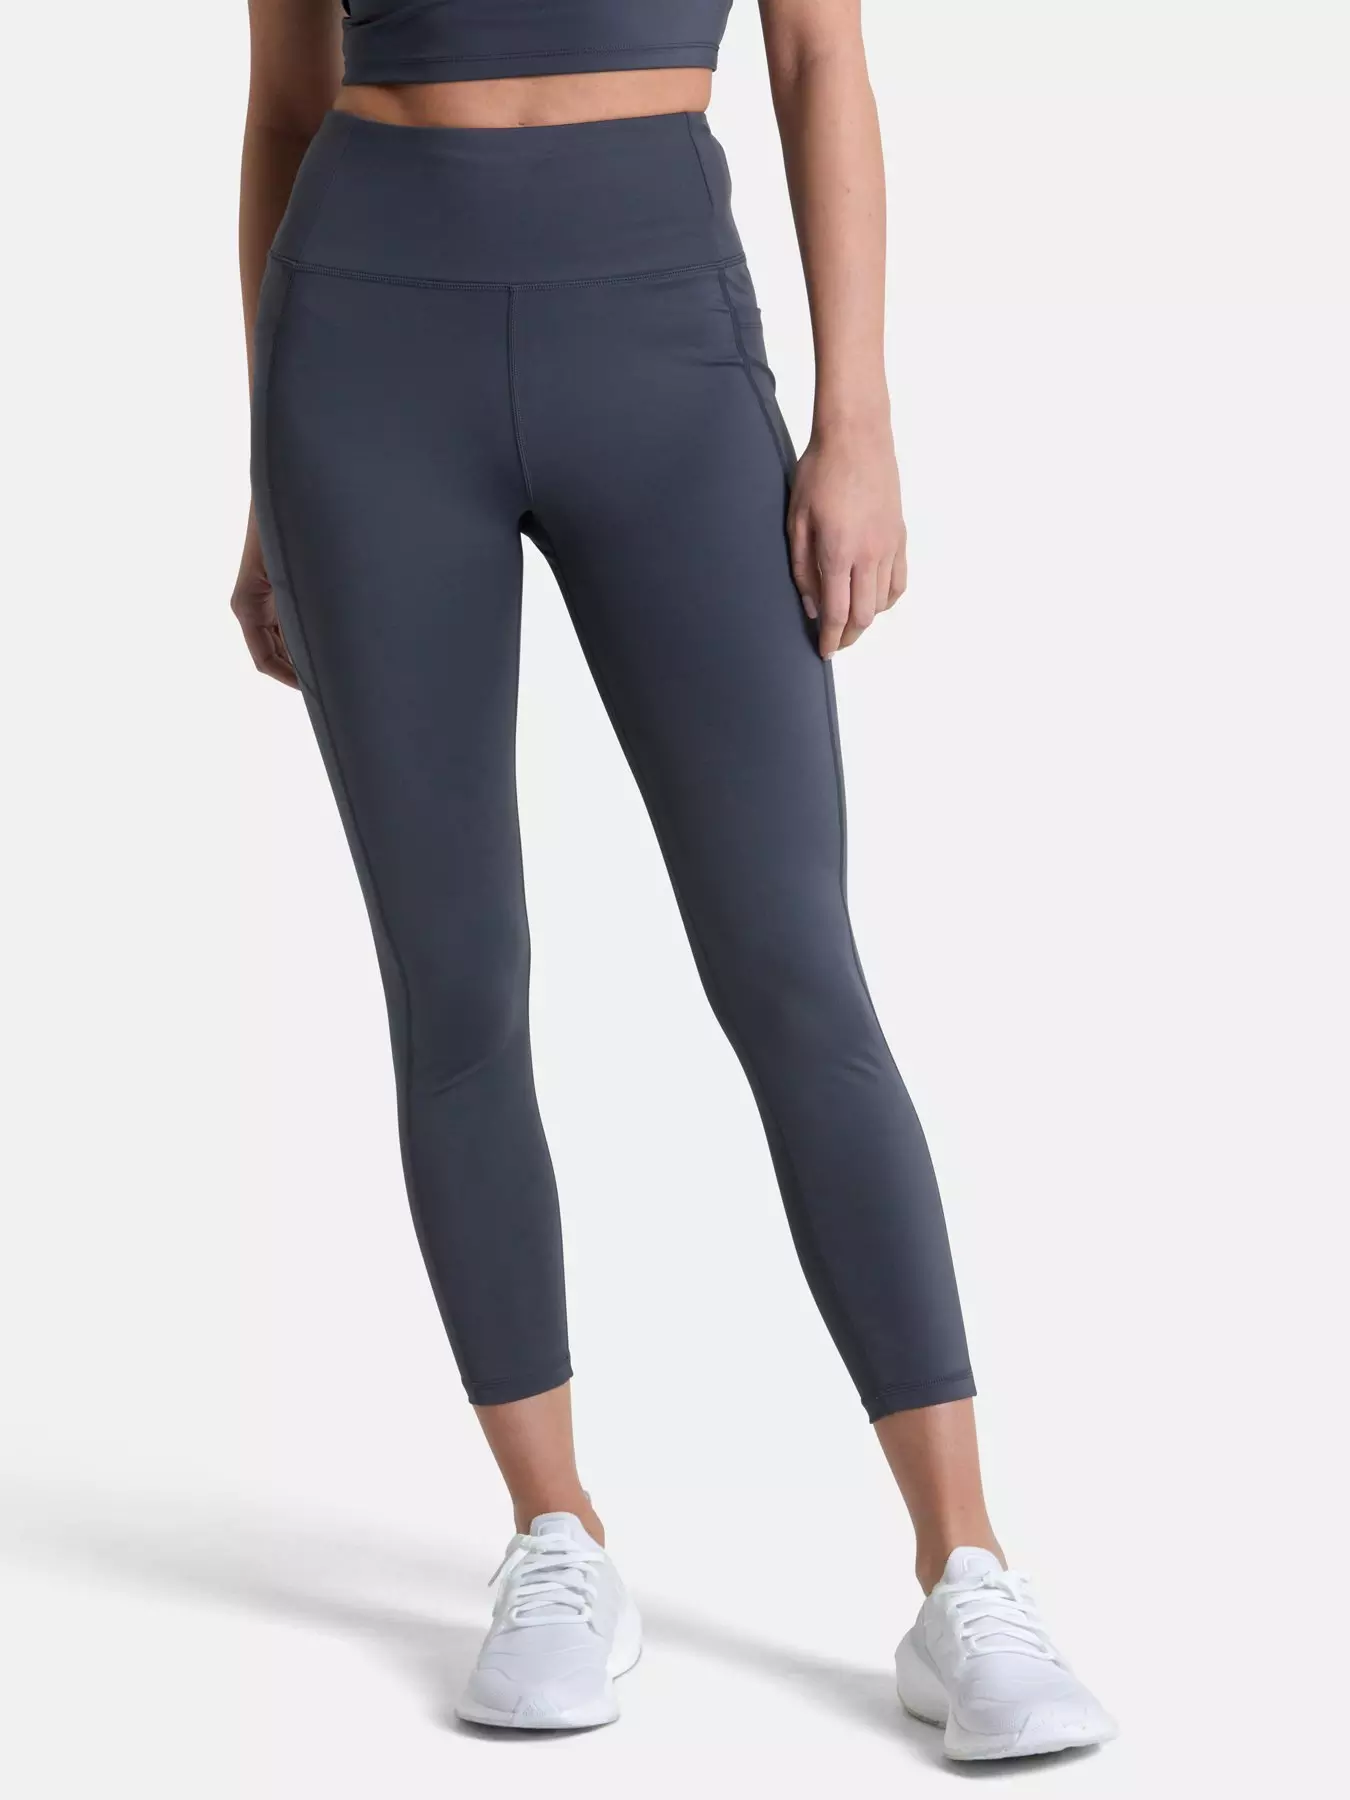 Lululemon Base Pace High Rise Tight 25 (Size 12), Women's Fashion,  Activewear on Carousell